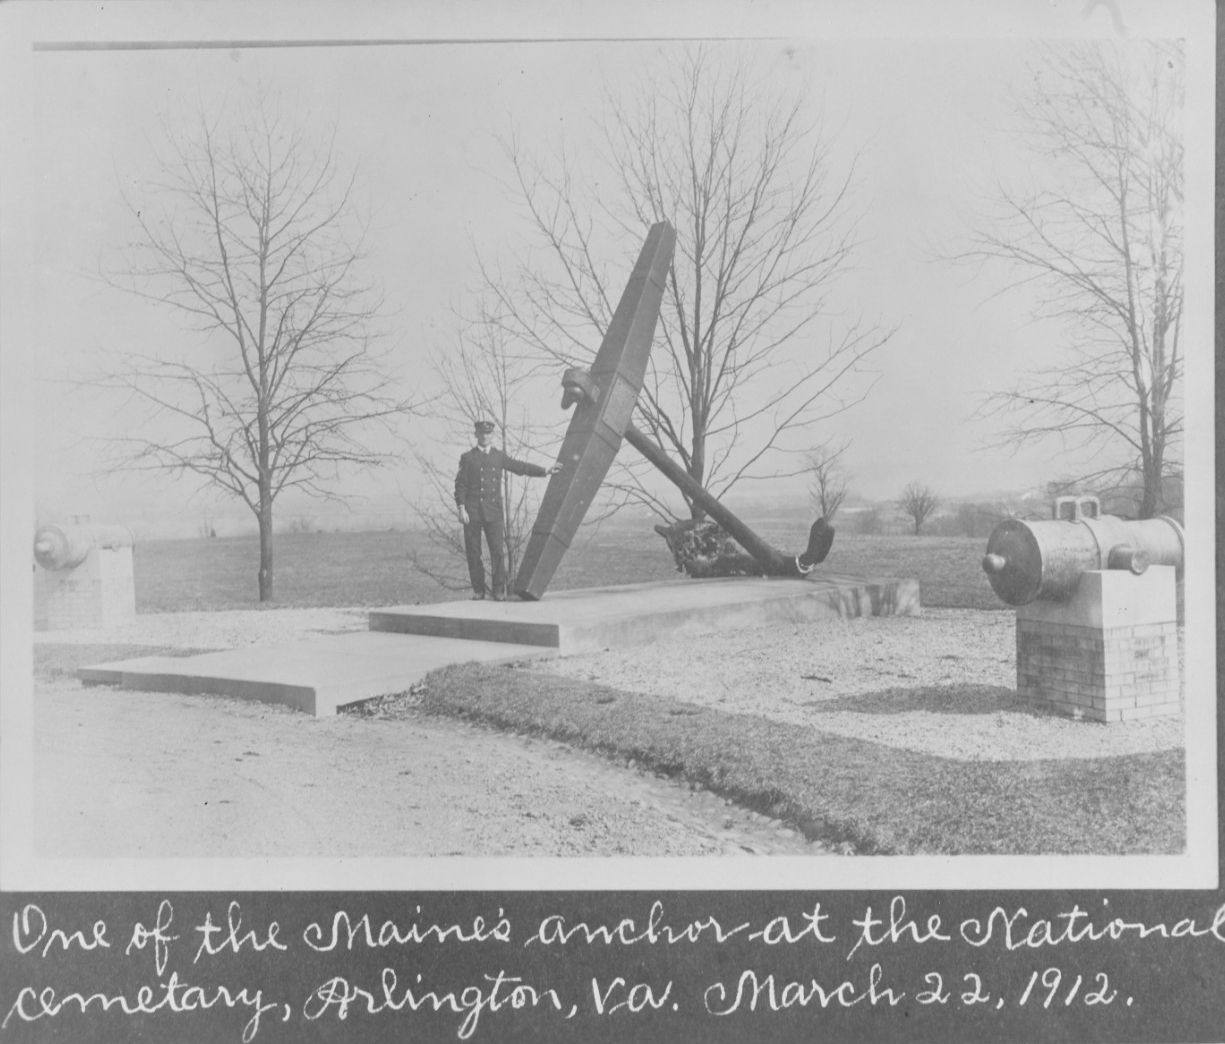 Monument in Memory of MAINE Disaster, Arlington National Cemetery, March 22, 1912